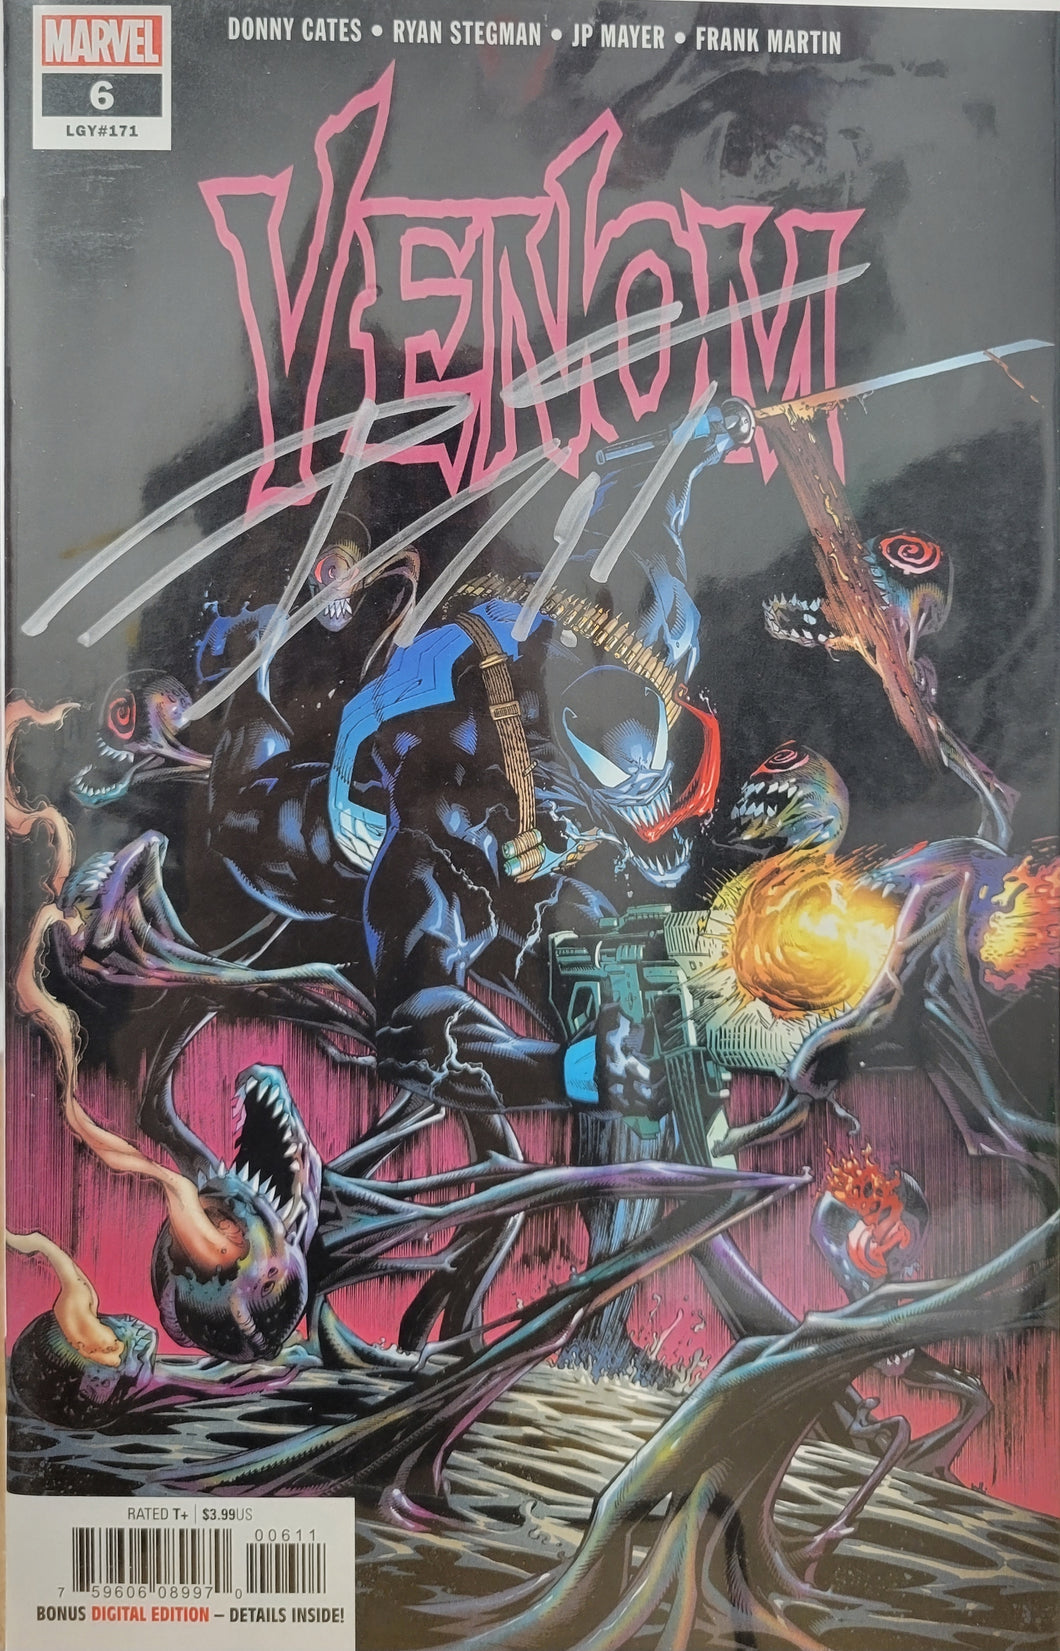 Venom #6 Signed by Donny Cates w/COA